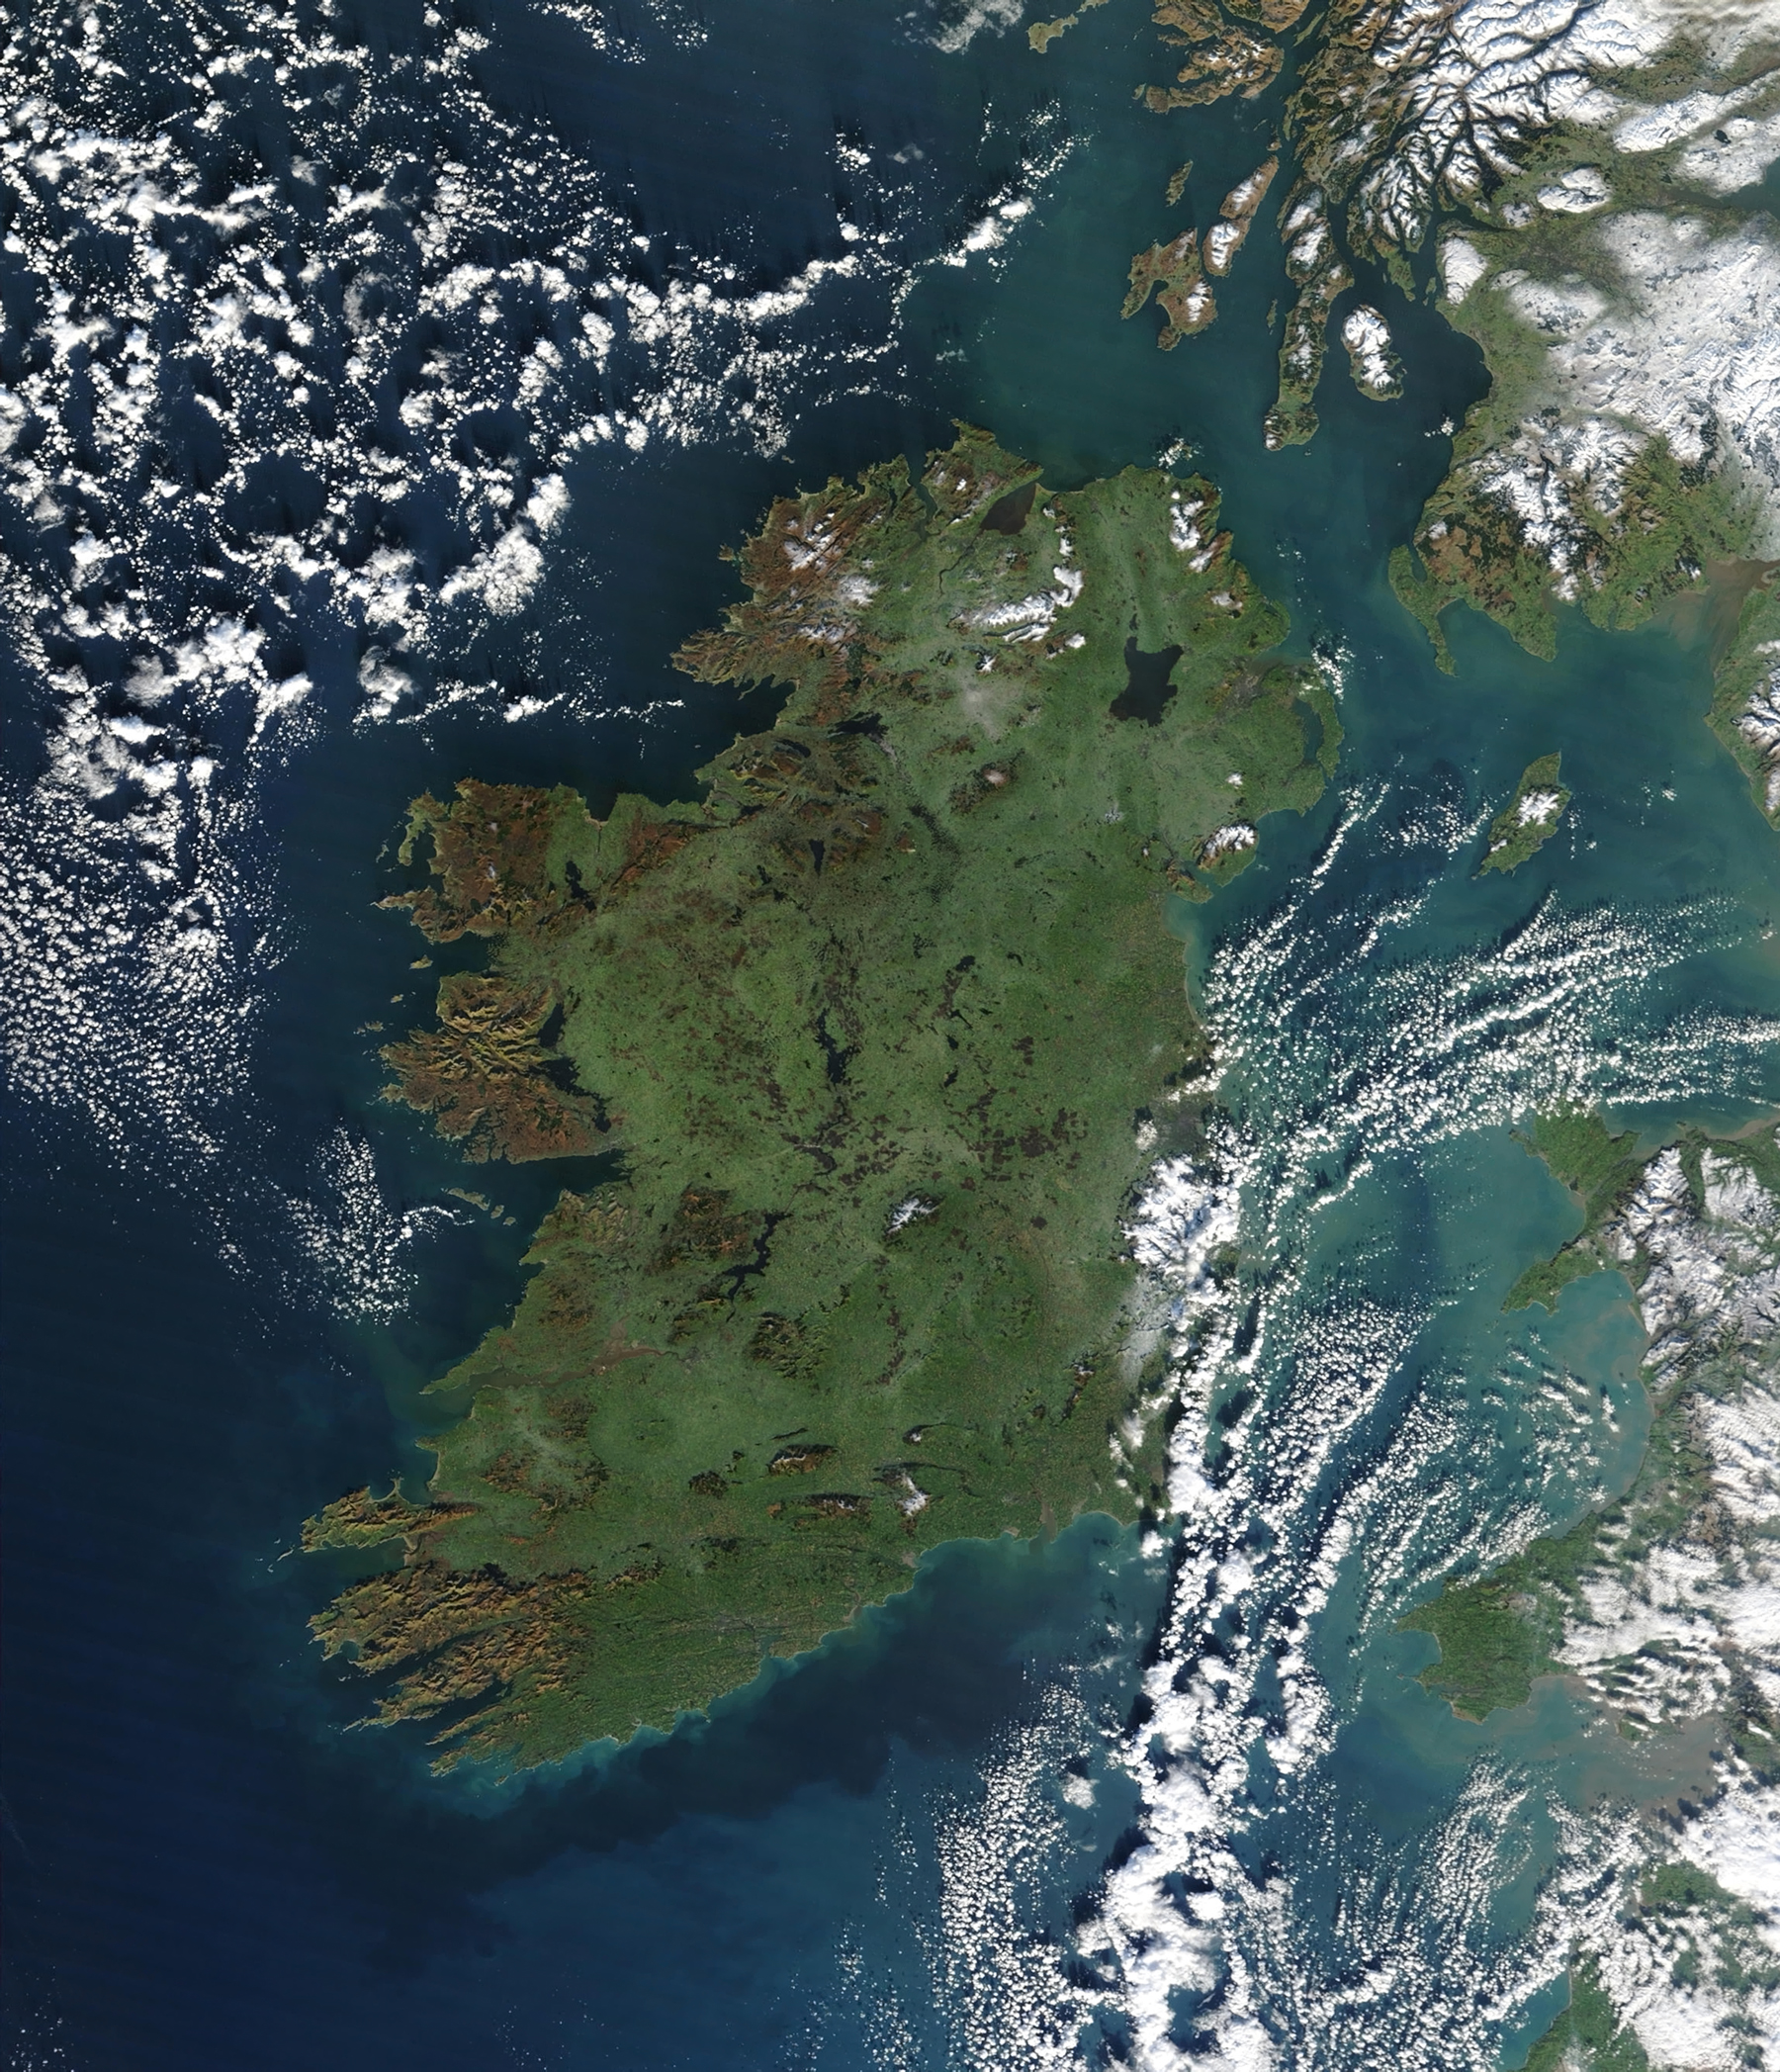 Ireland_from_space_edit